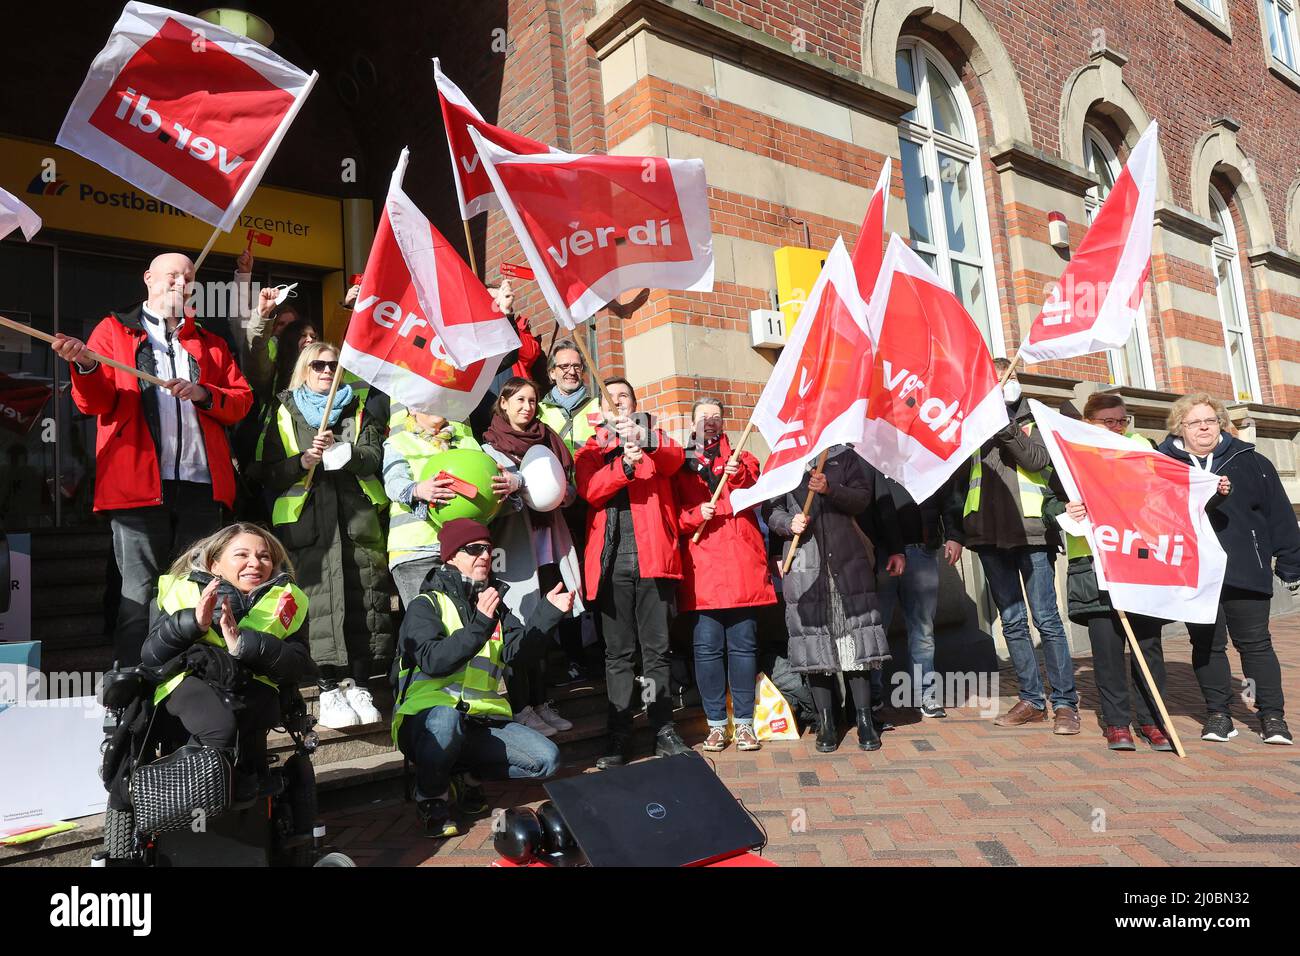 Hamburg, Germany. 18th Mar, 2022. Strikers stand together with flags at a rally in front of a closed Postbank branch. The trade union Verdi calls the 15,000 employees of Postbank to a nationwide strike starting today. Called to the walkouts from Friday, March 18, 2022, are employees in all Postbank branches, call centers and Postbank locations. Credit: Bodo Marks/dpa/Alamy Live News Stock Photo